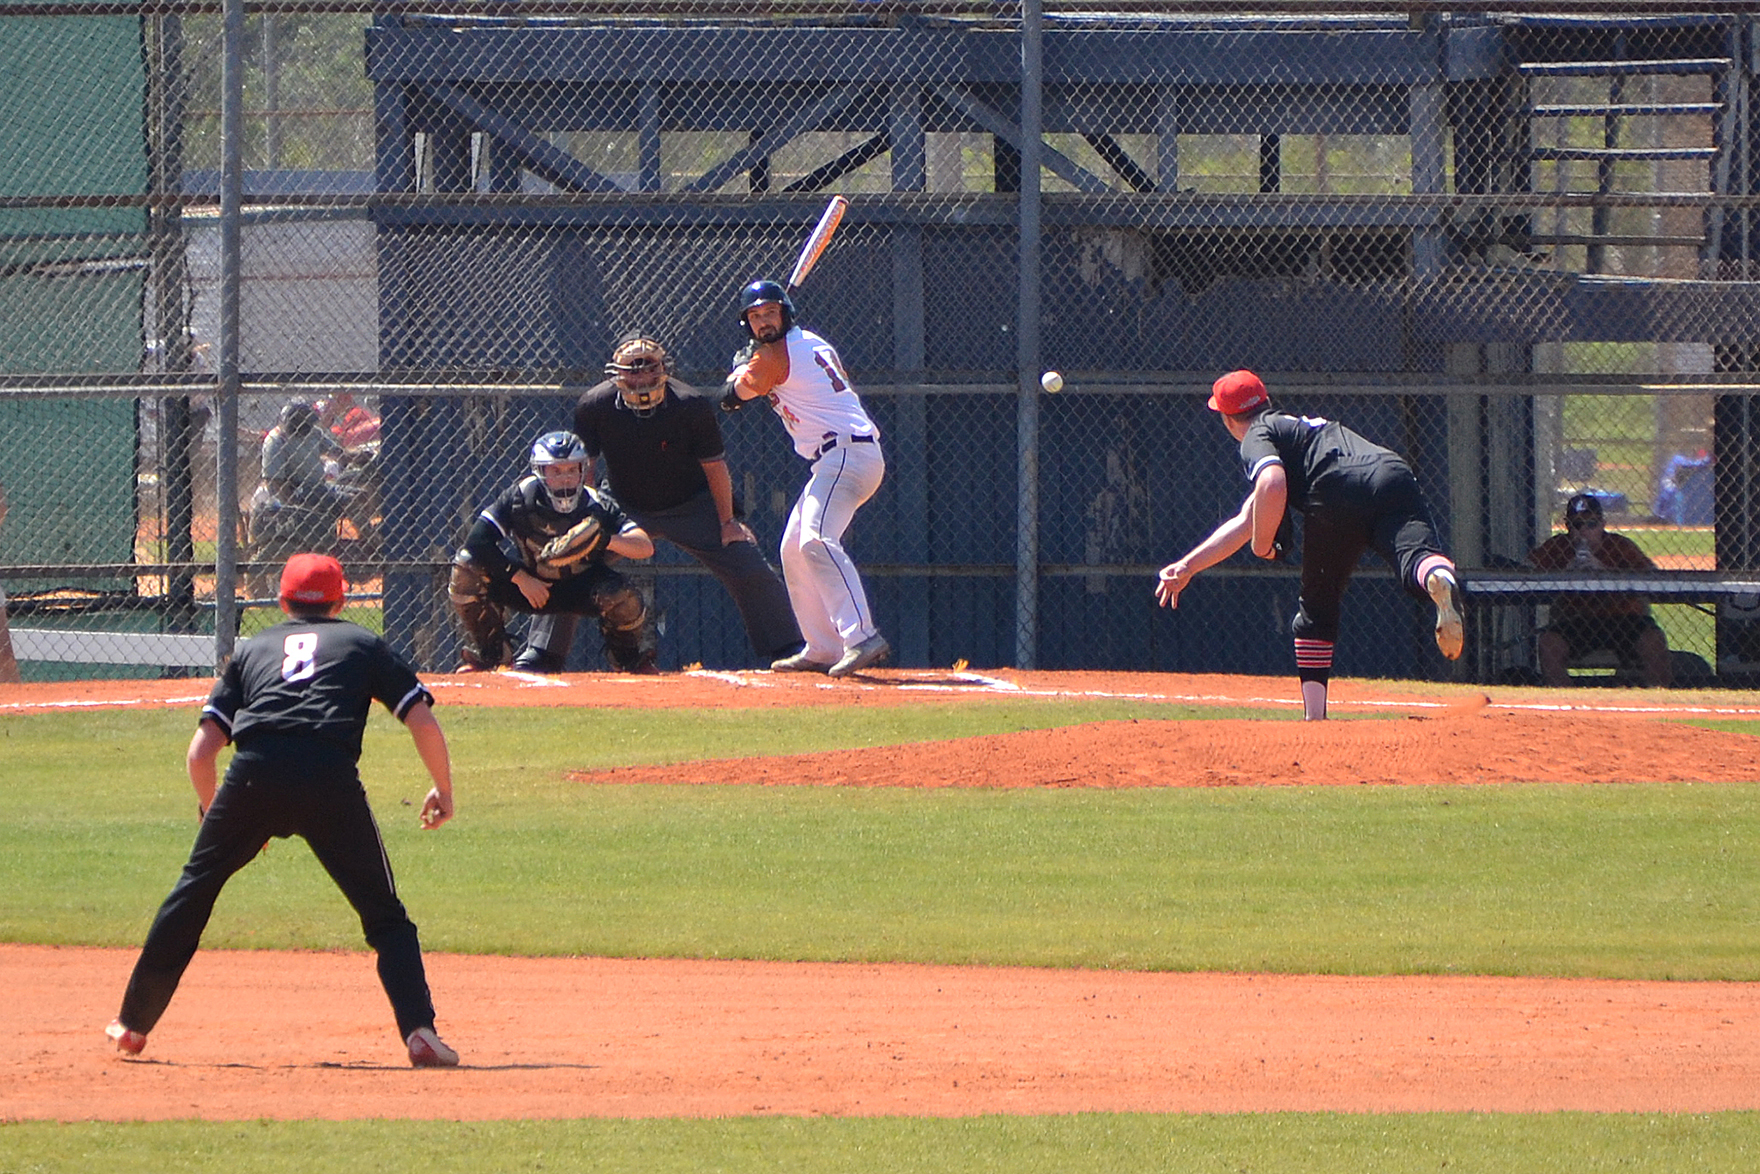 A pitch is thrown during the RussMatt Baseball Invitational held in Winter Haven